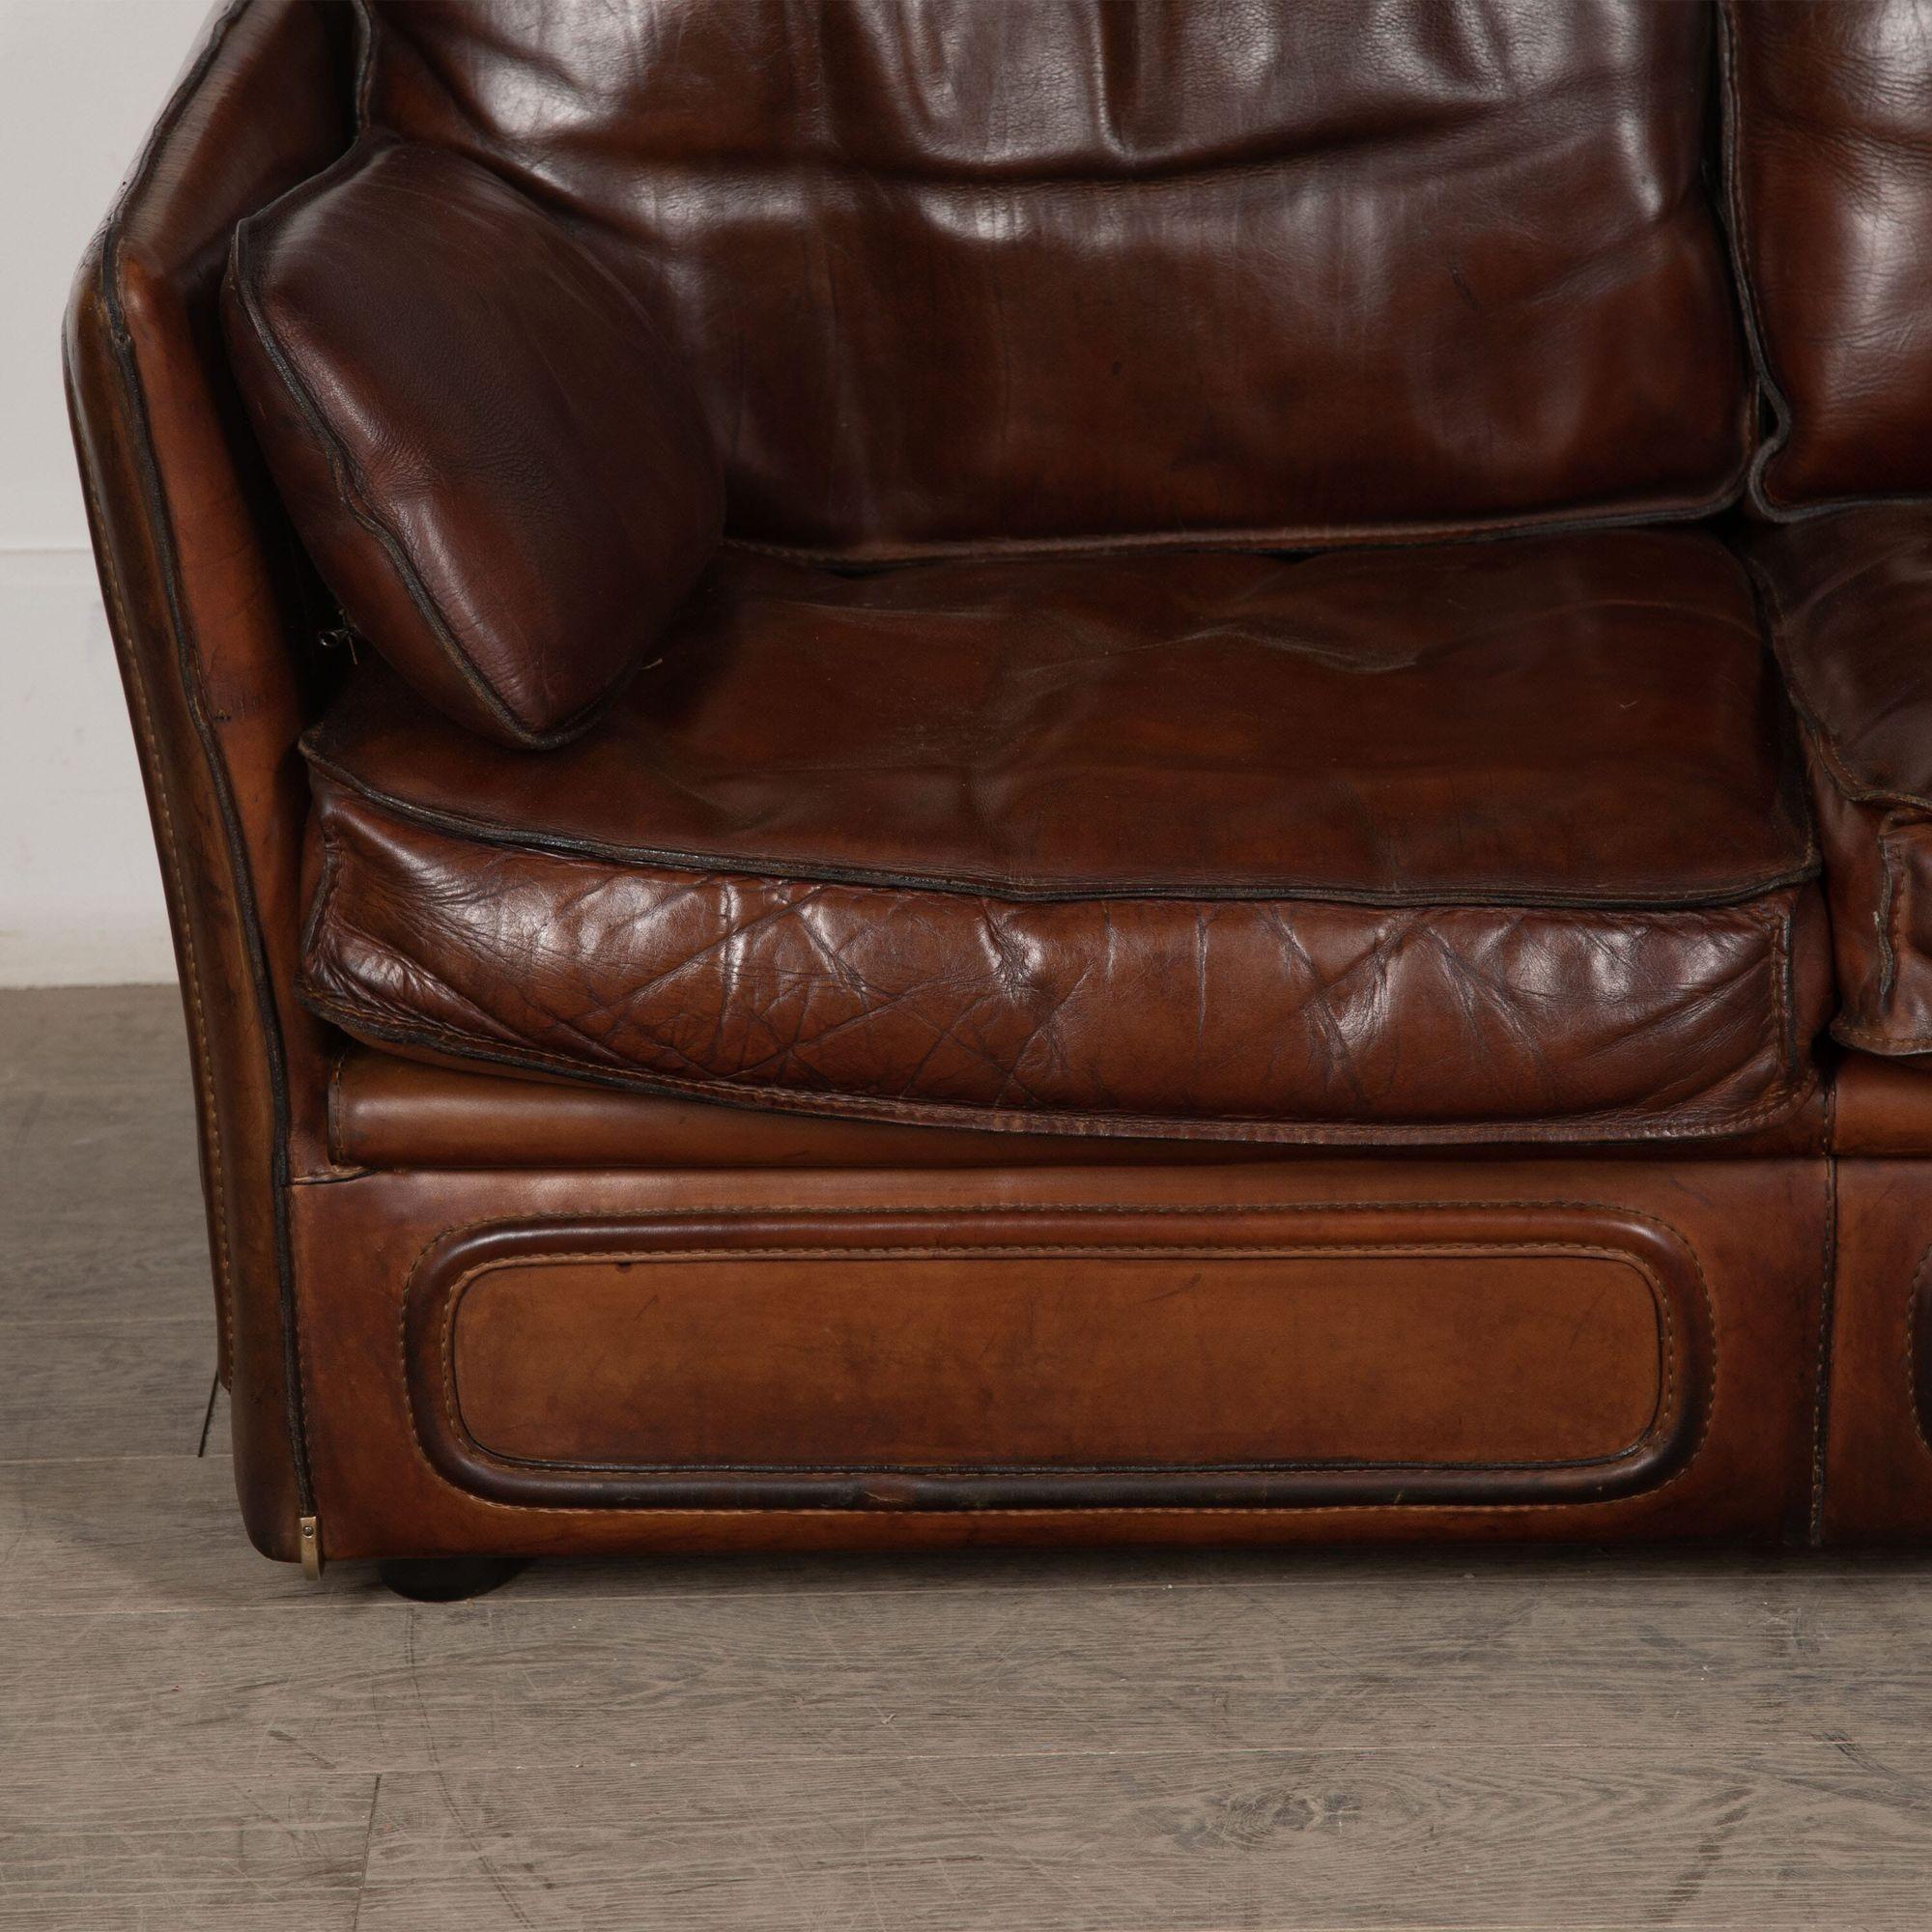 Roche Bobois Saddle Leather Sofa After Hermes For Sale 1